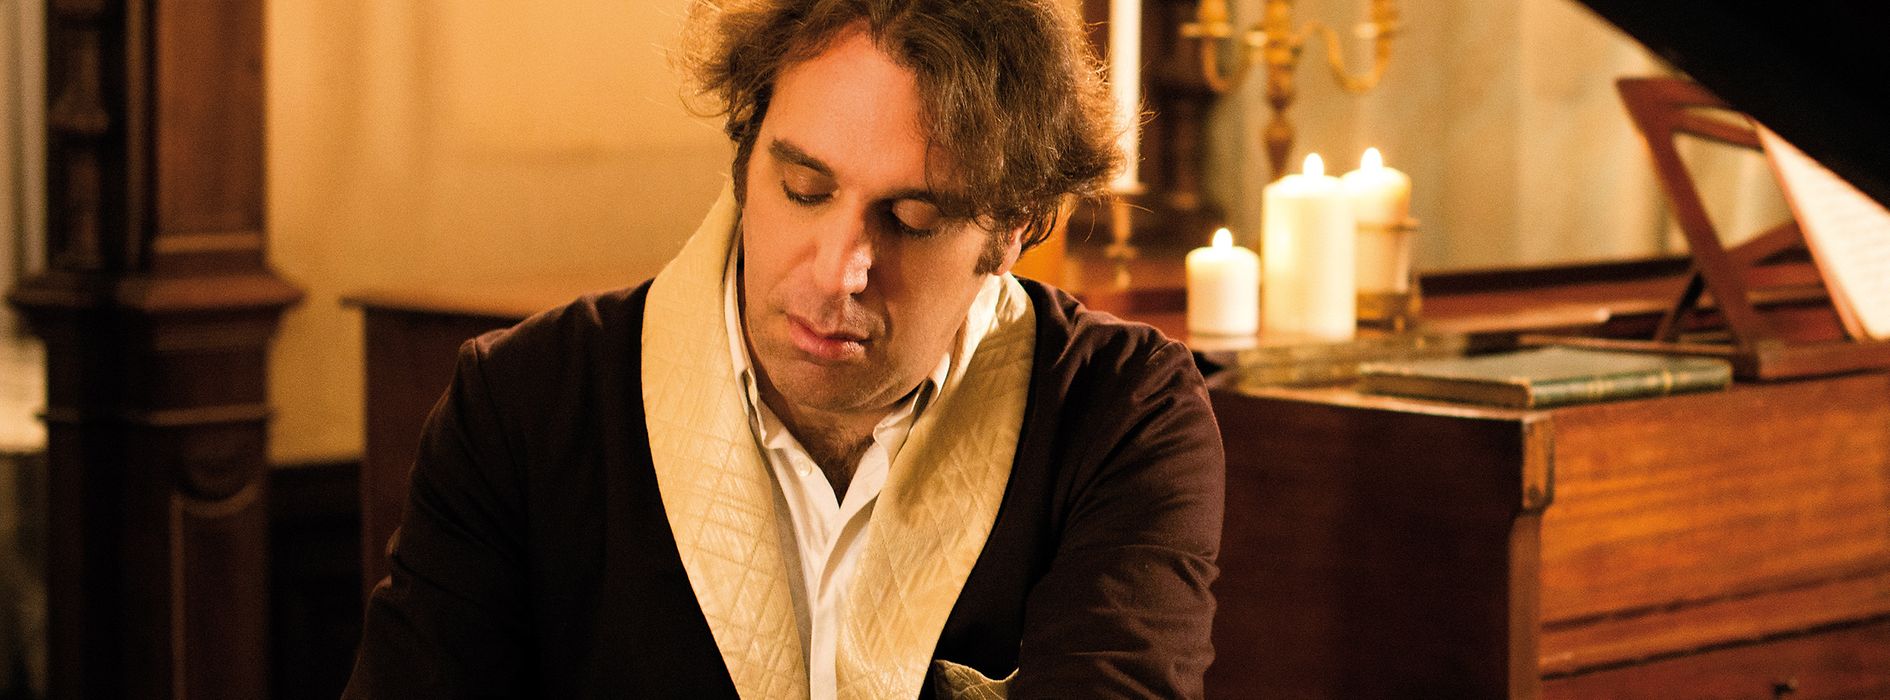 The musician Chilly Gonzales in a dressing gown at the piano. 